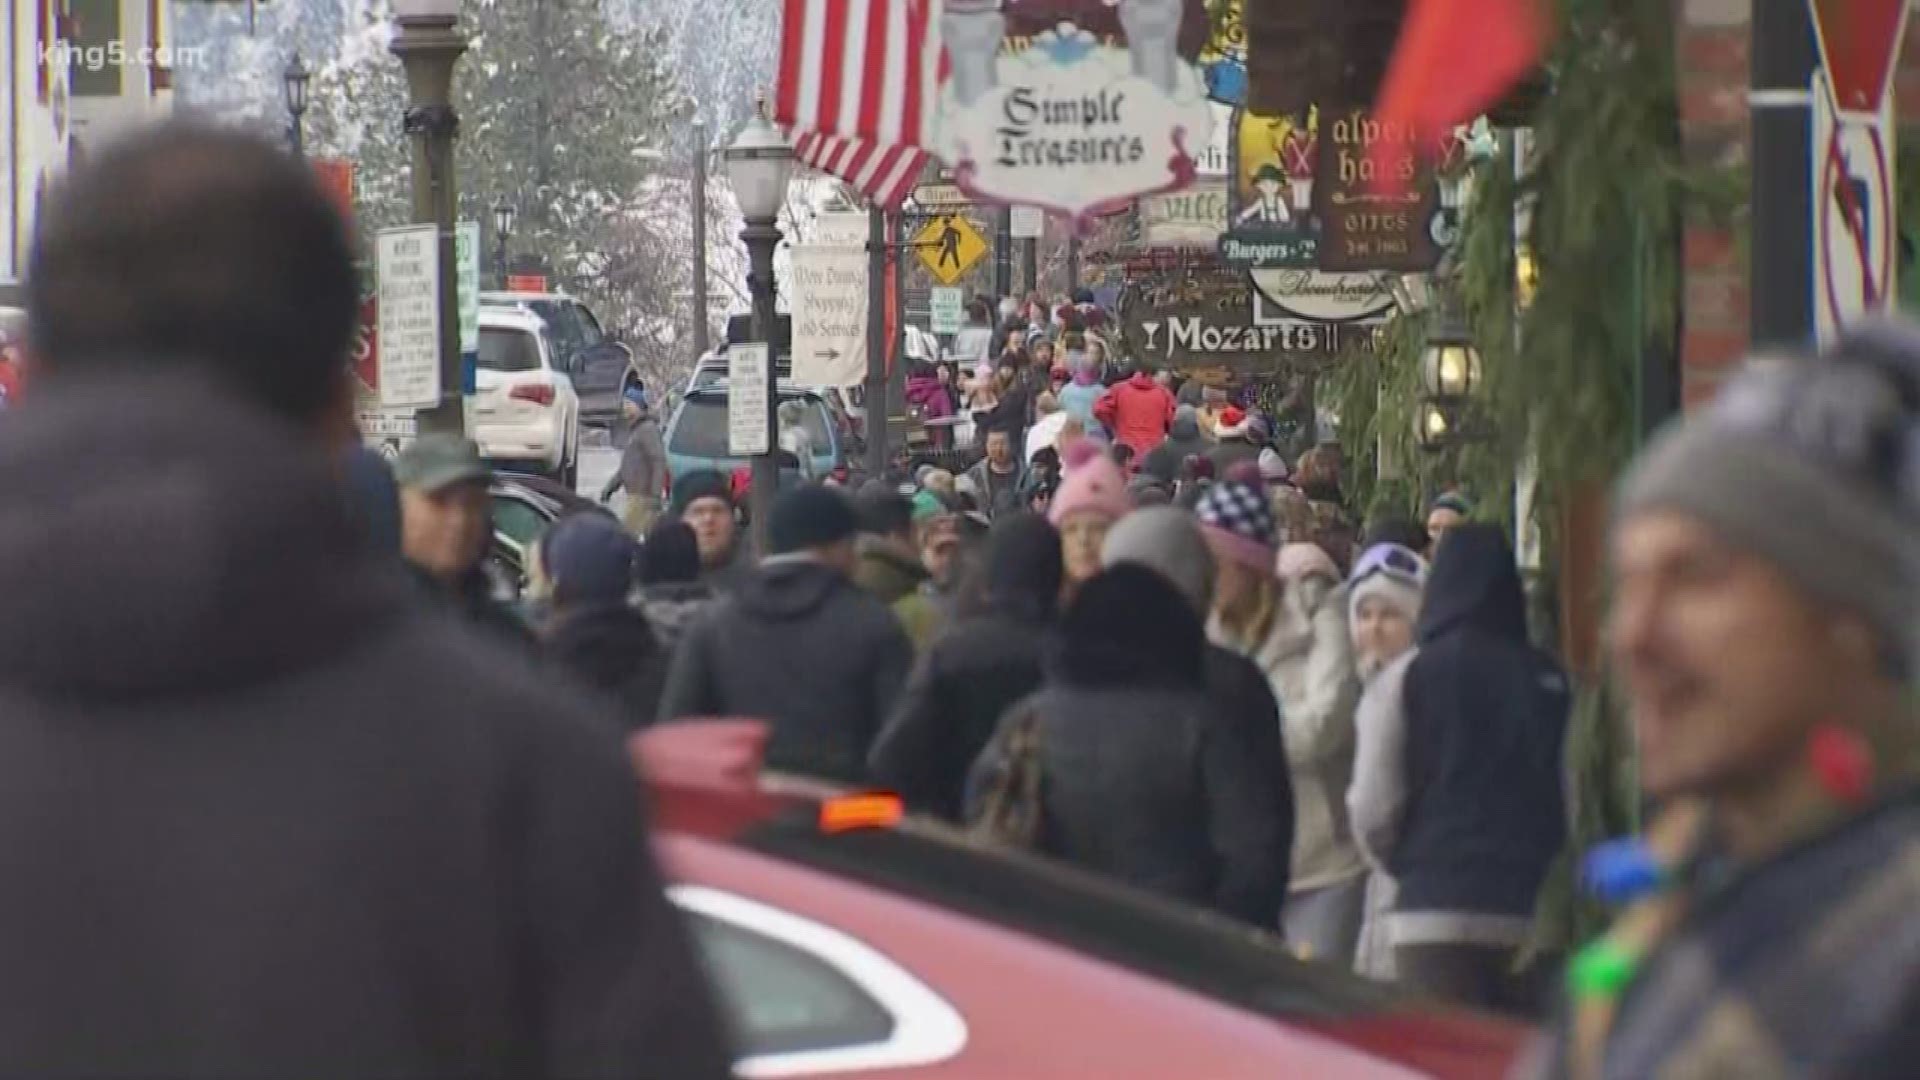 One place that is always busy during the holiday season is Leavenworth, Washington. KING 5 Photojournalist Joseph Huerta visited the Bavarian-style village Christmas Eve.